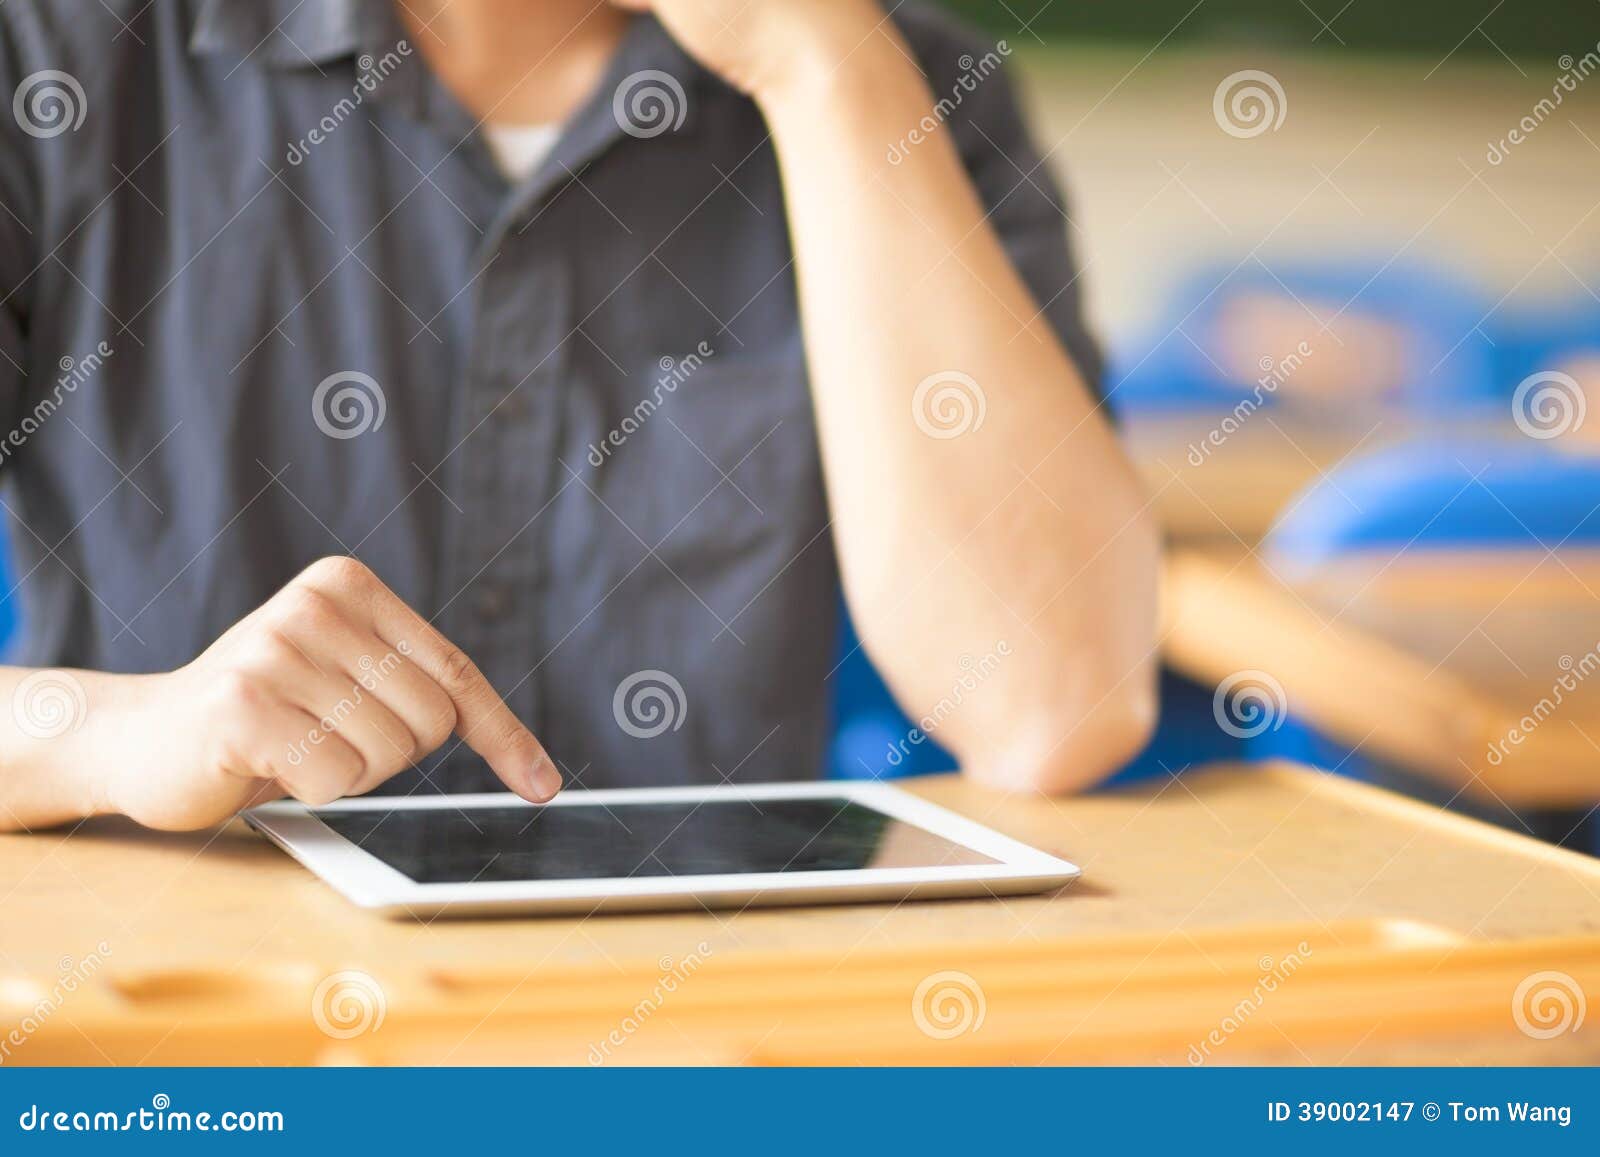 young man using a tablet or ipad